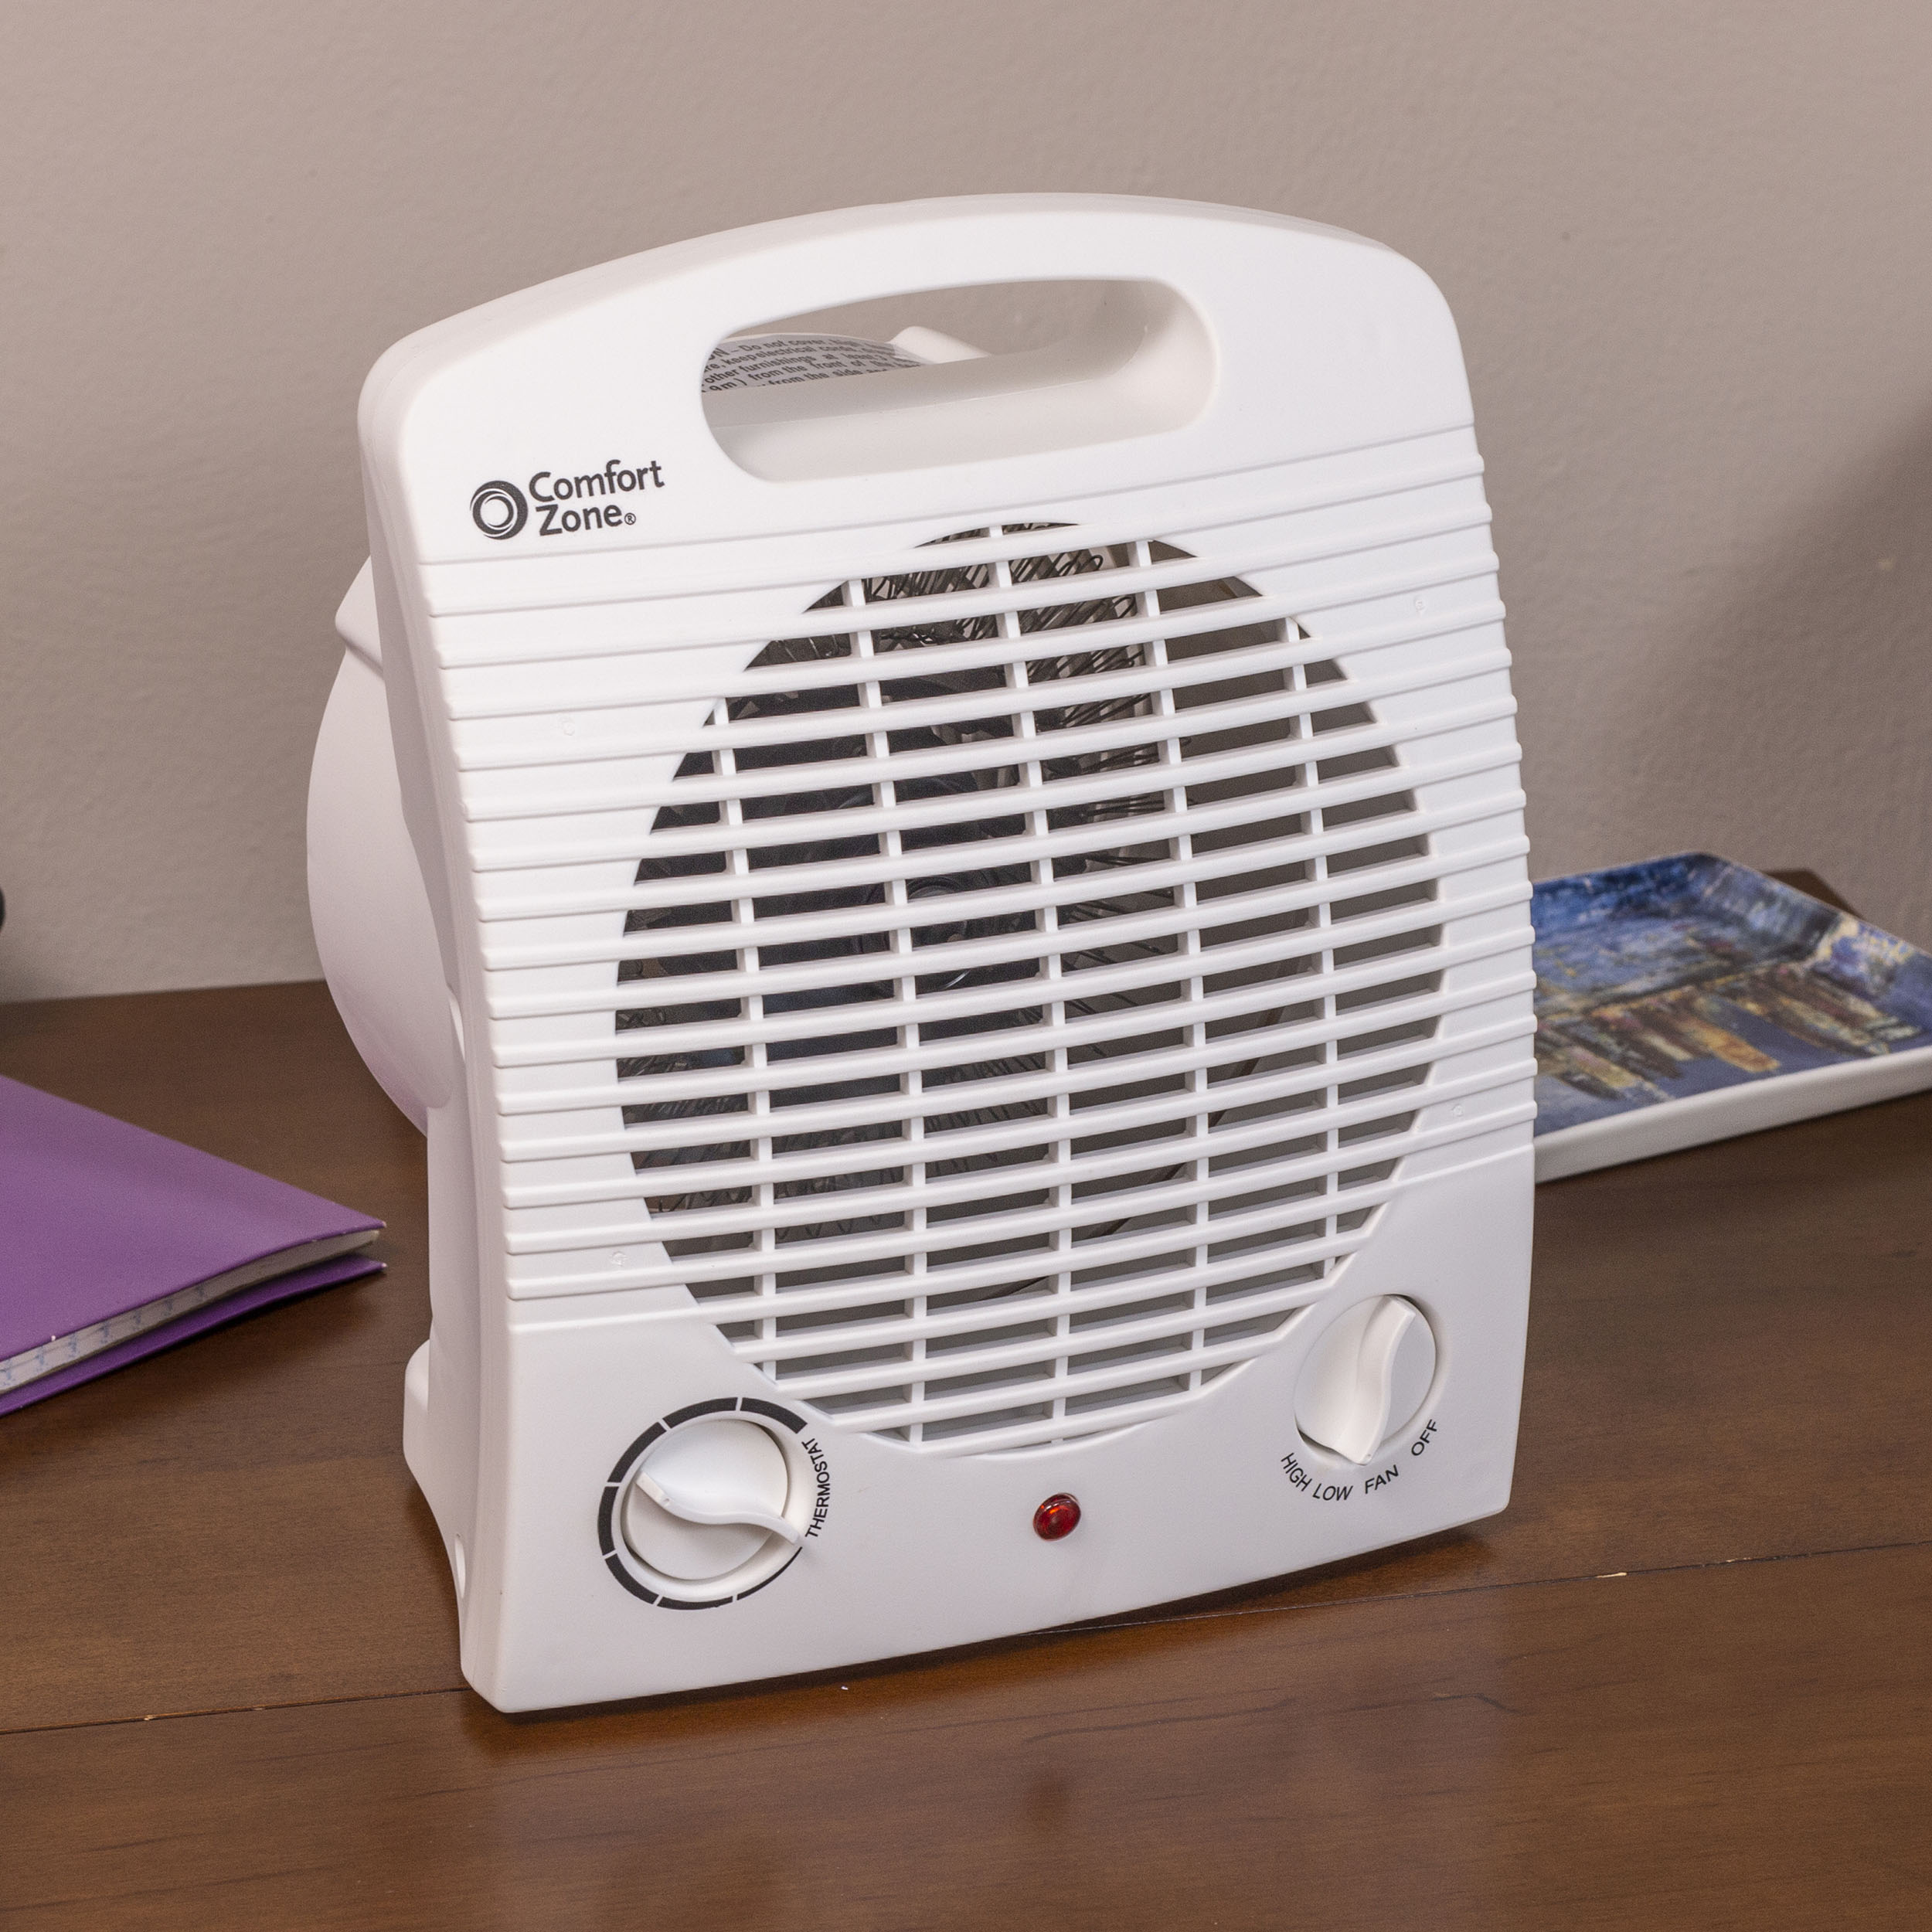 Comfort Zone 750/1,500-Watt Portable Compact Space Heater with Thermostat, White - image 5 of 7